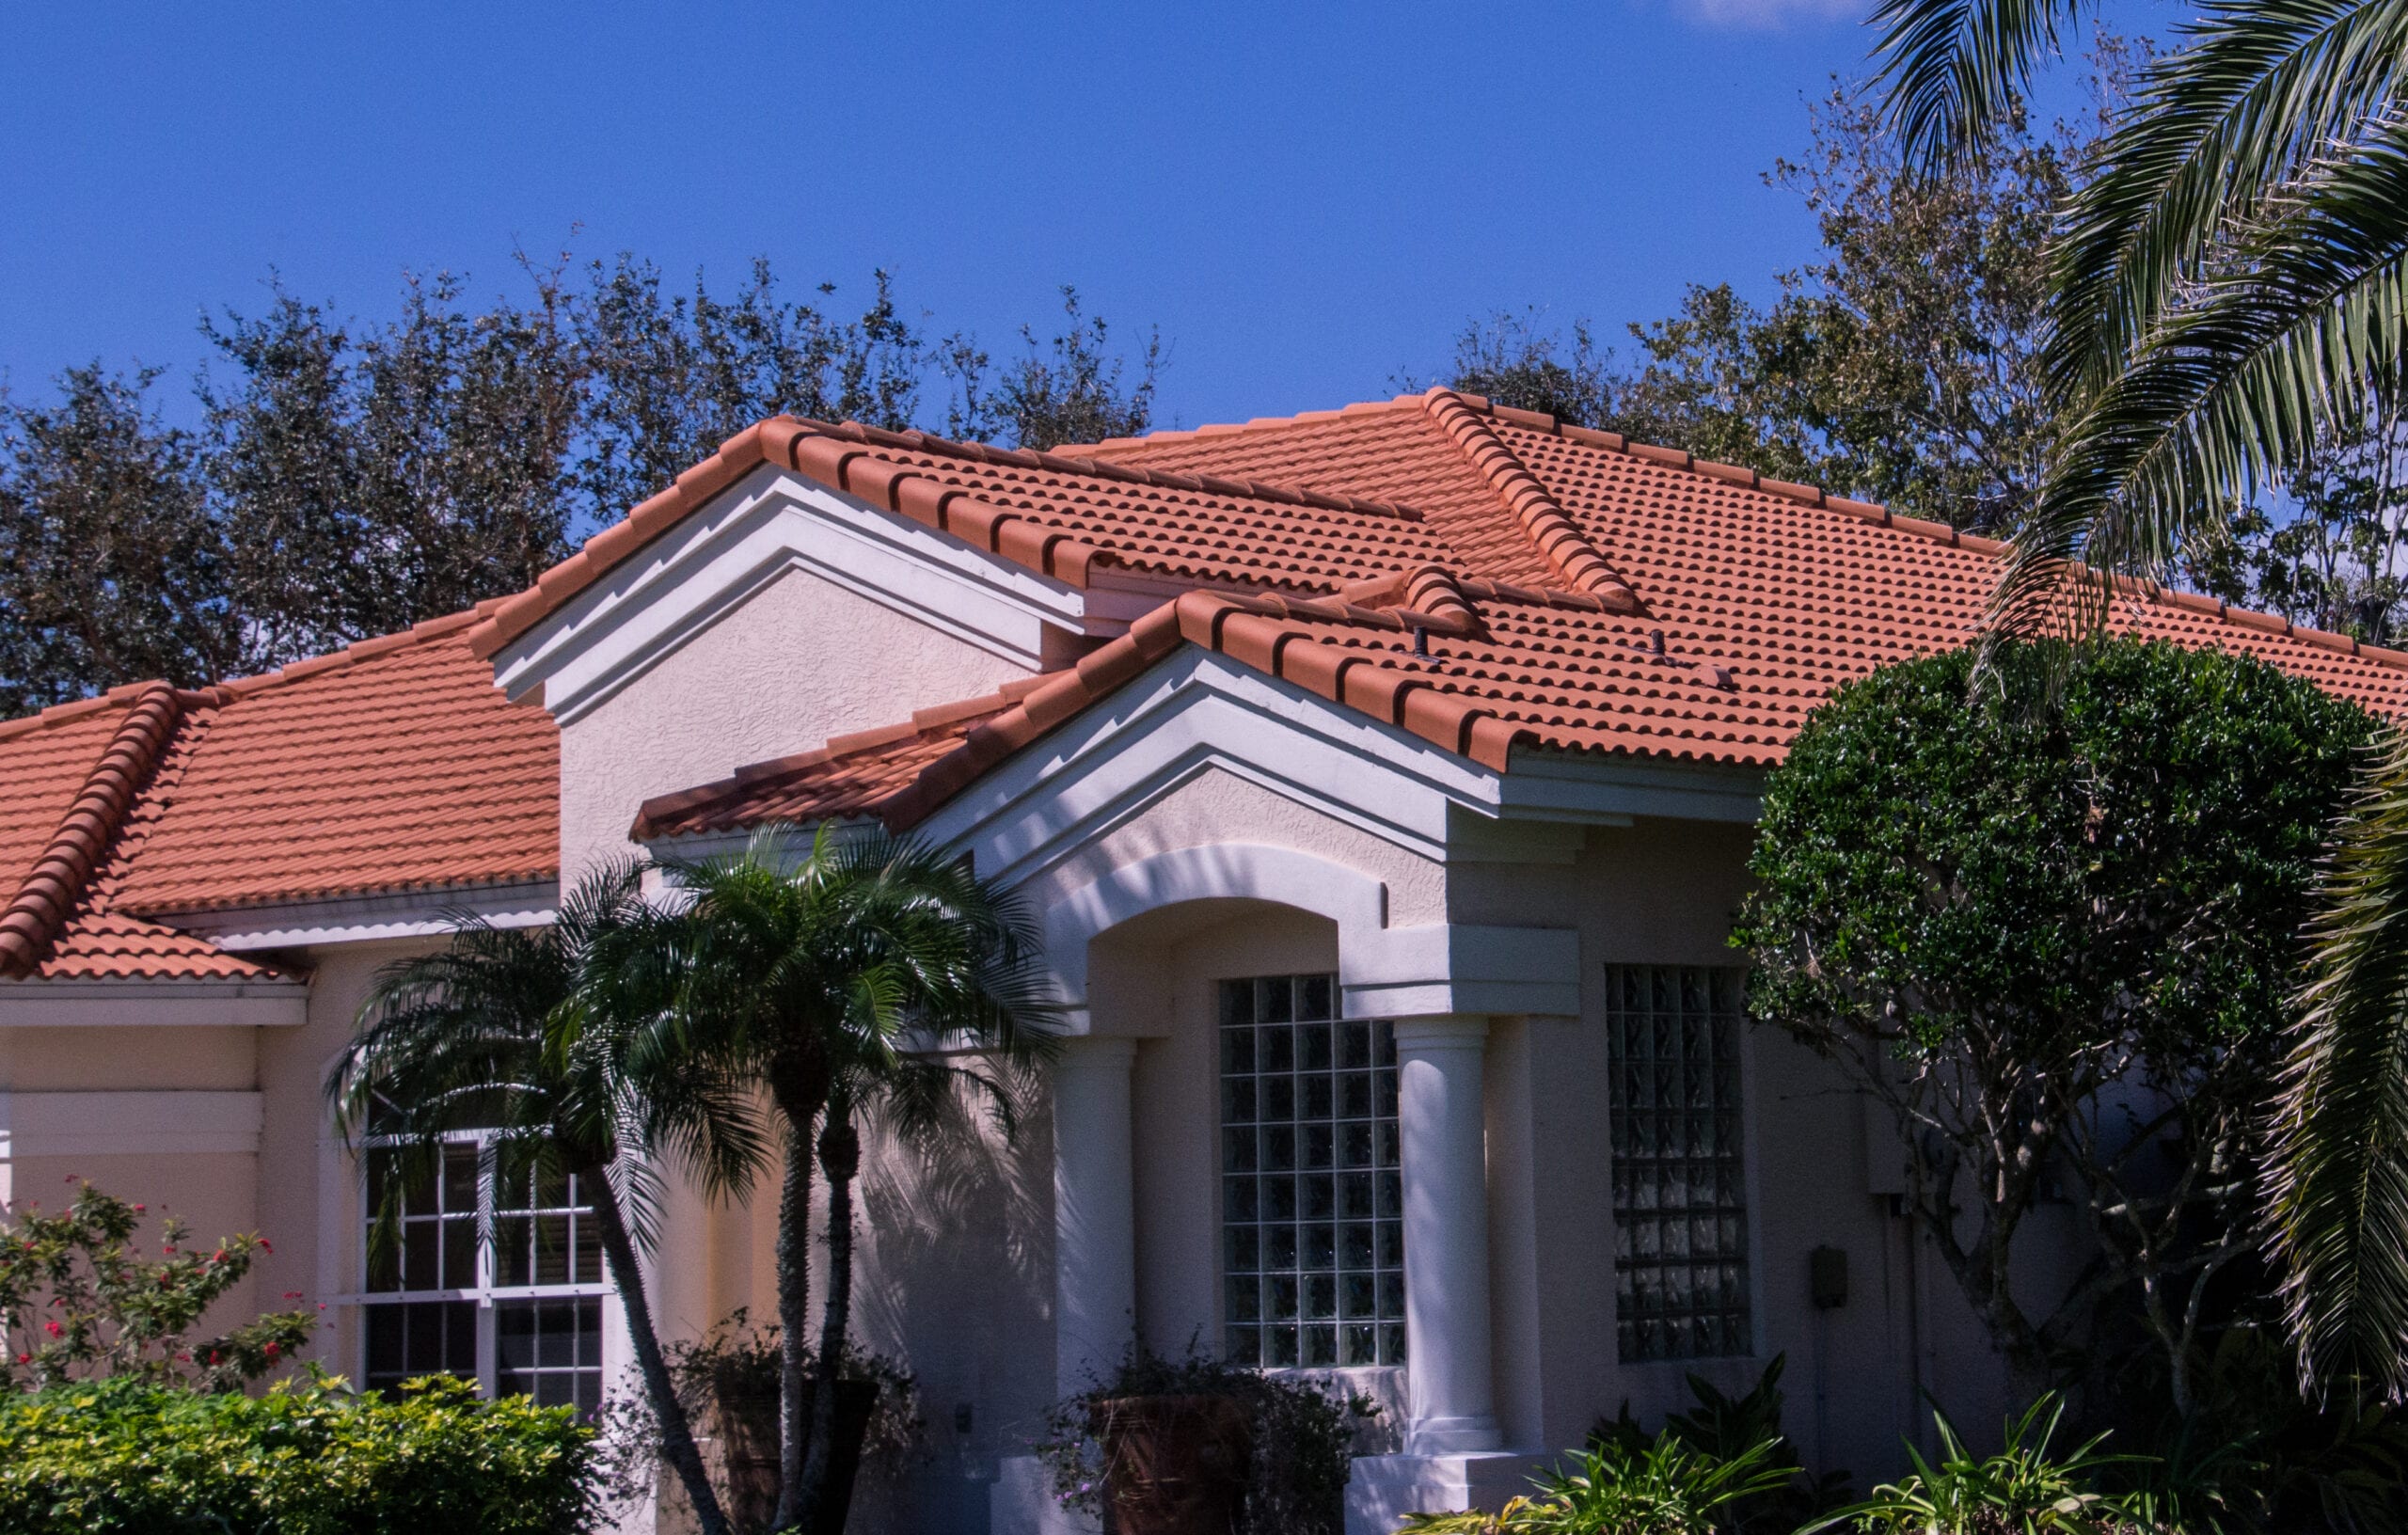 Stucco home with tile roof